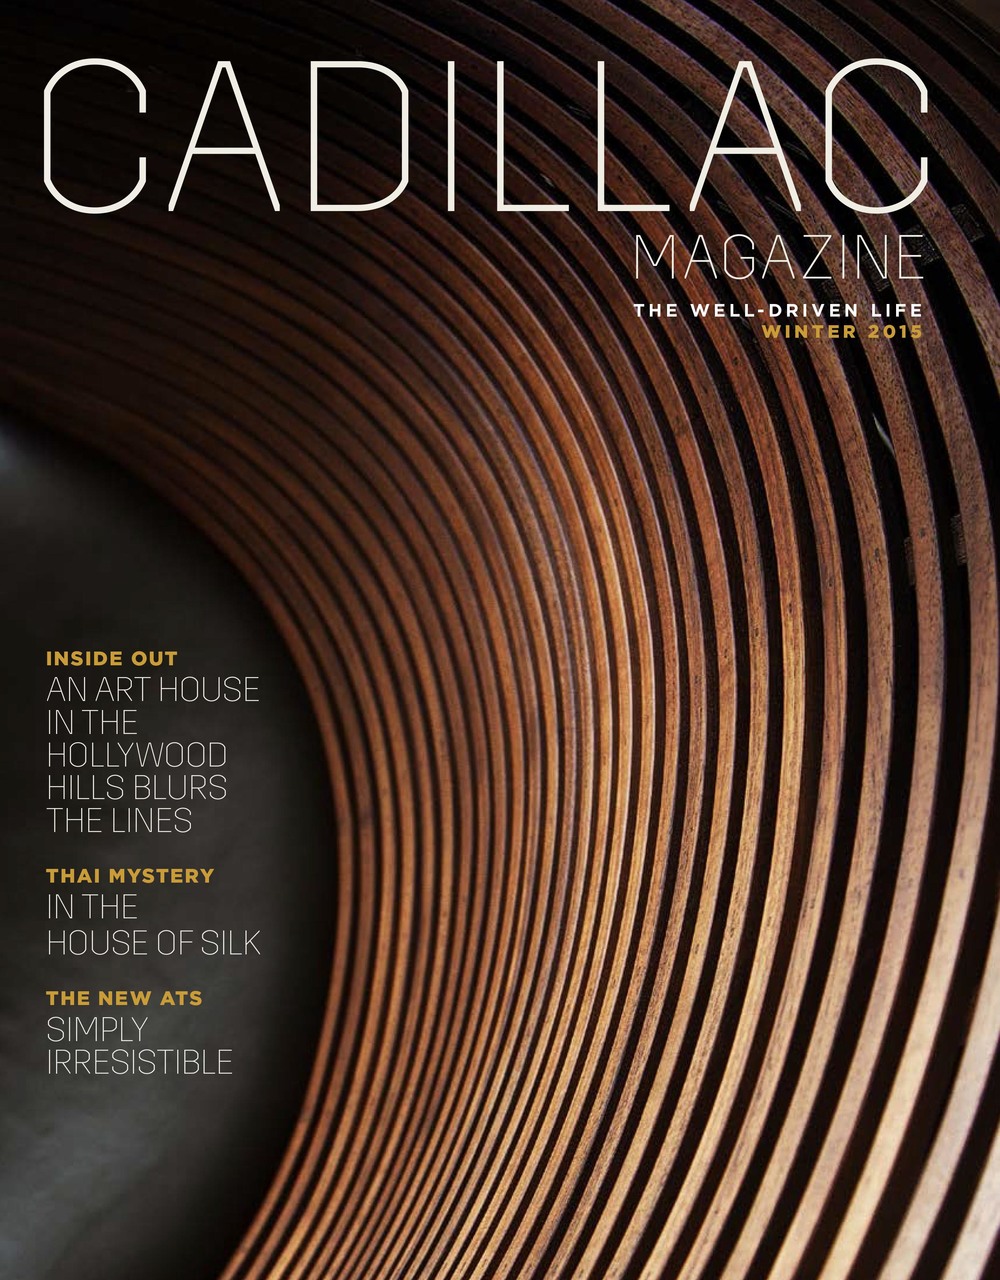 Cadillac Magazine - Winter 2015 (Gallery feature)